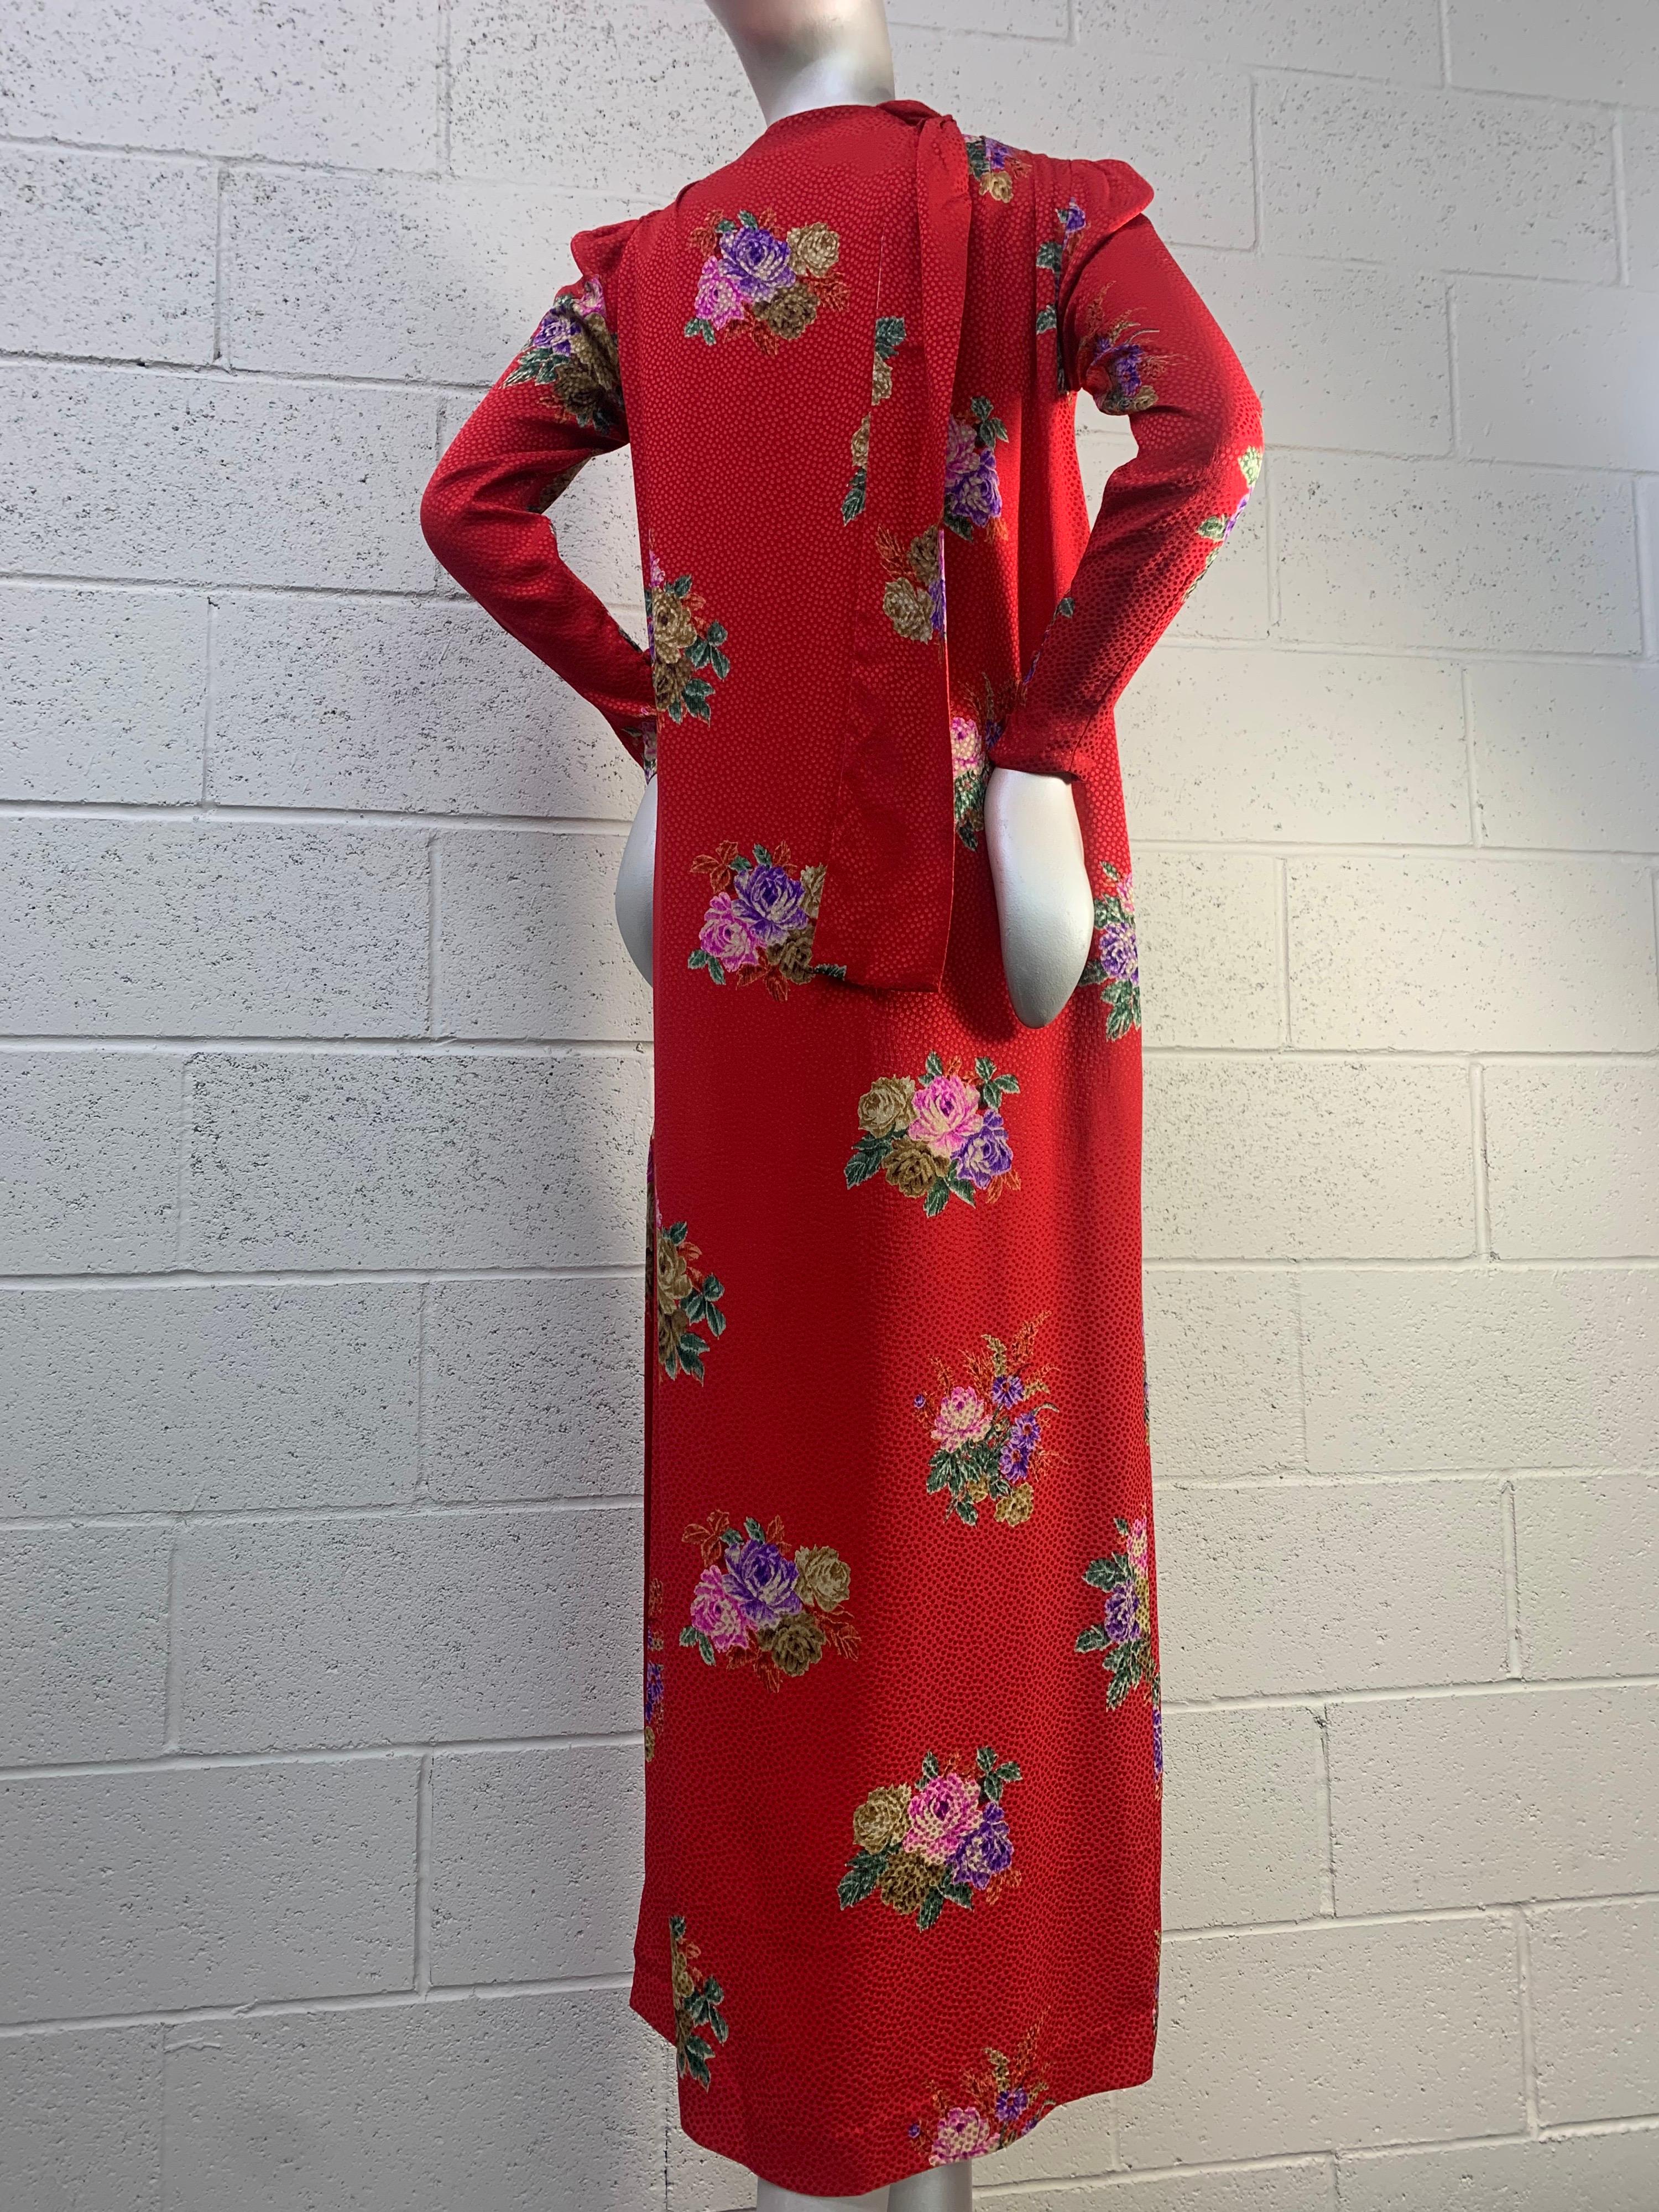 1980s Andrea Odicini Red & Floral Silk Jacquard Print Long Sleeved Gown w/ Scarf 7